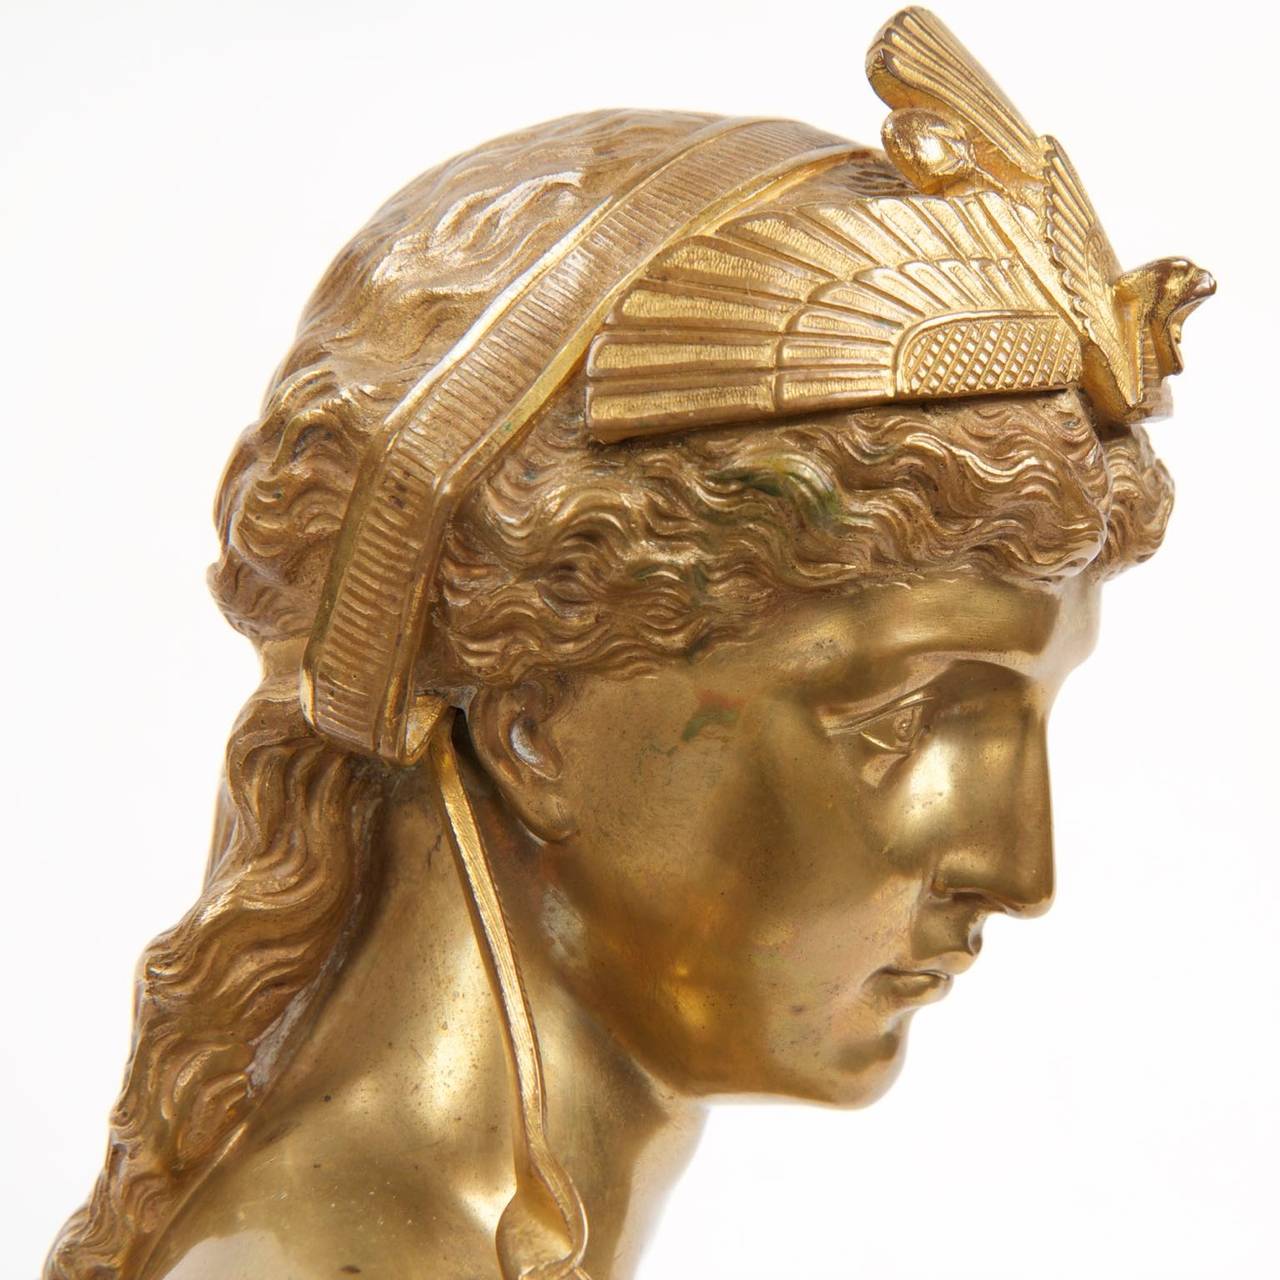 French Egyptian Revival Gilt Bronze Sculpture of Cleopatra by Eutrope Bouret